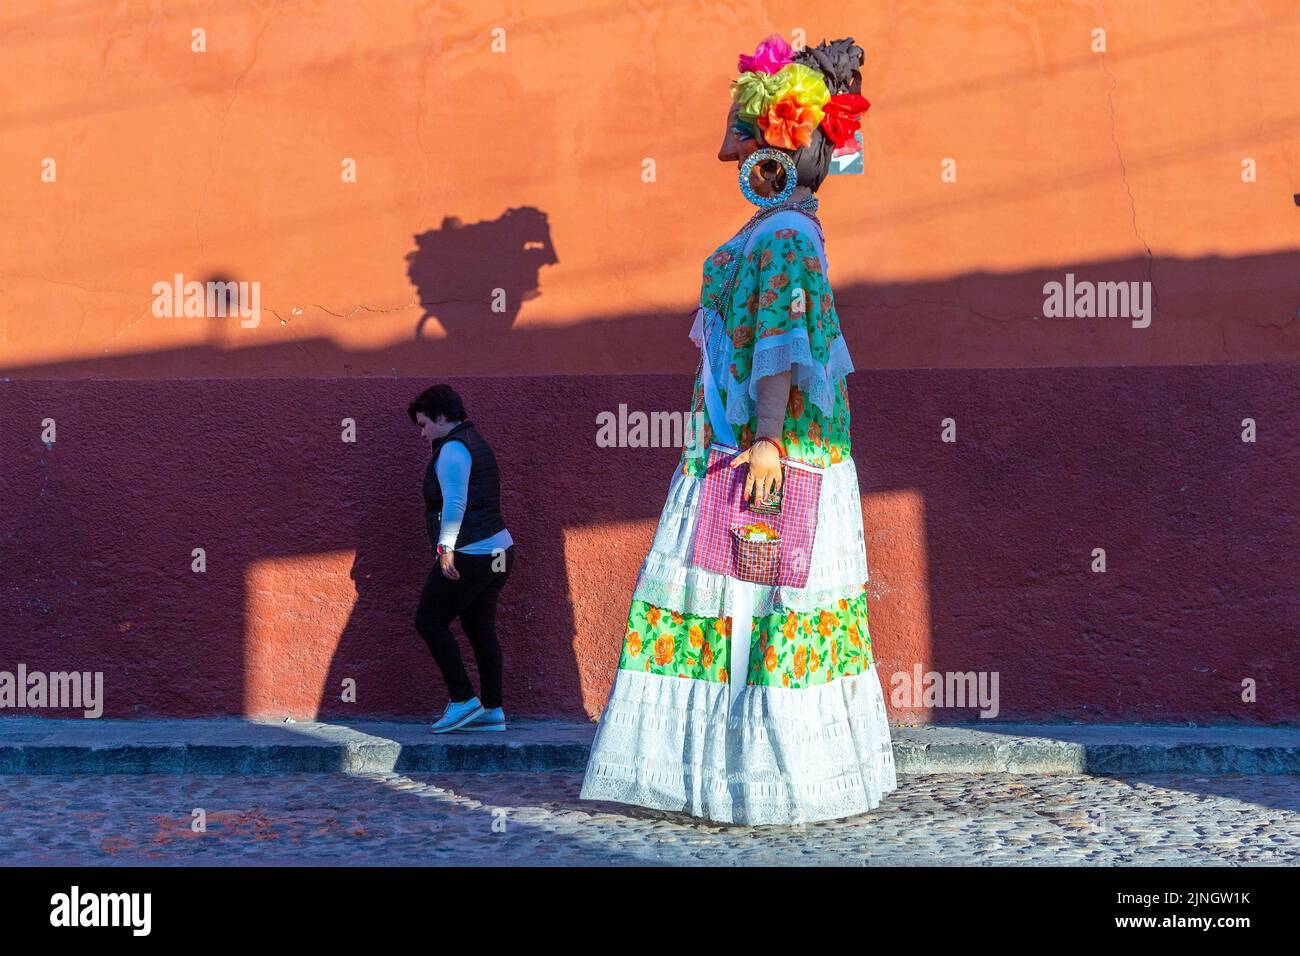 A woman passes a mojiganga, or giant puppet made from papier mâché as it walks through the historic city center of San Miguel de Allende, Mexico. Stock Photo